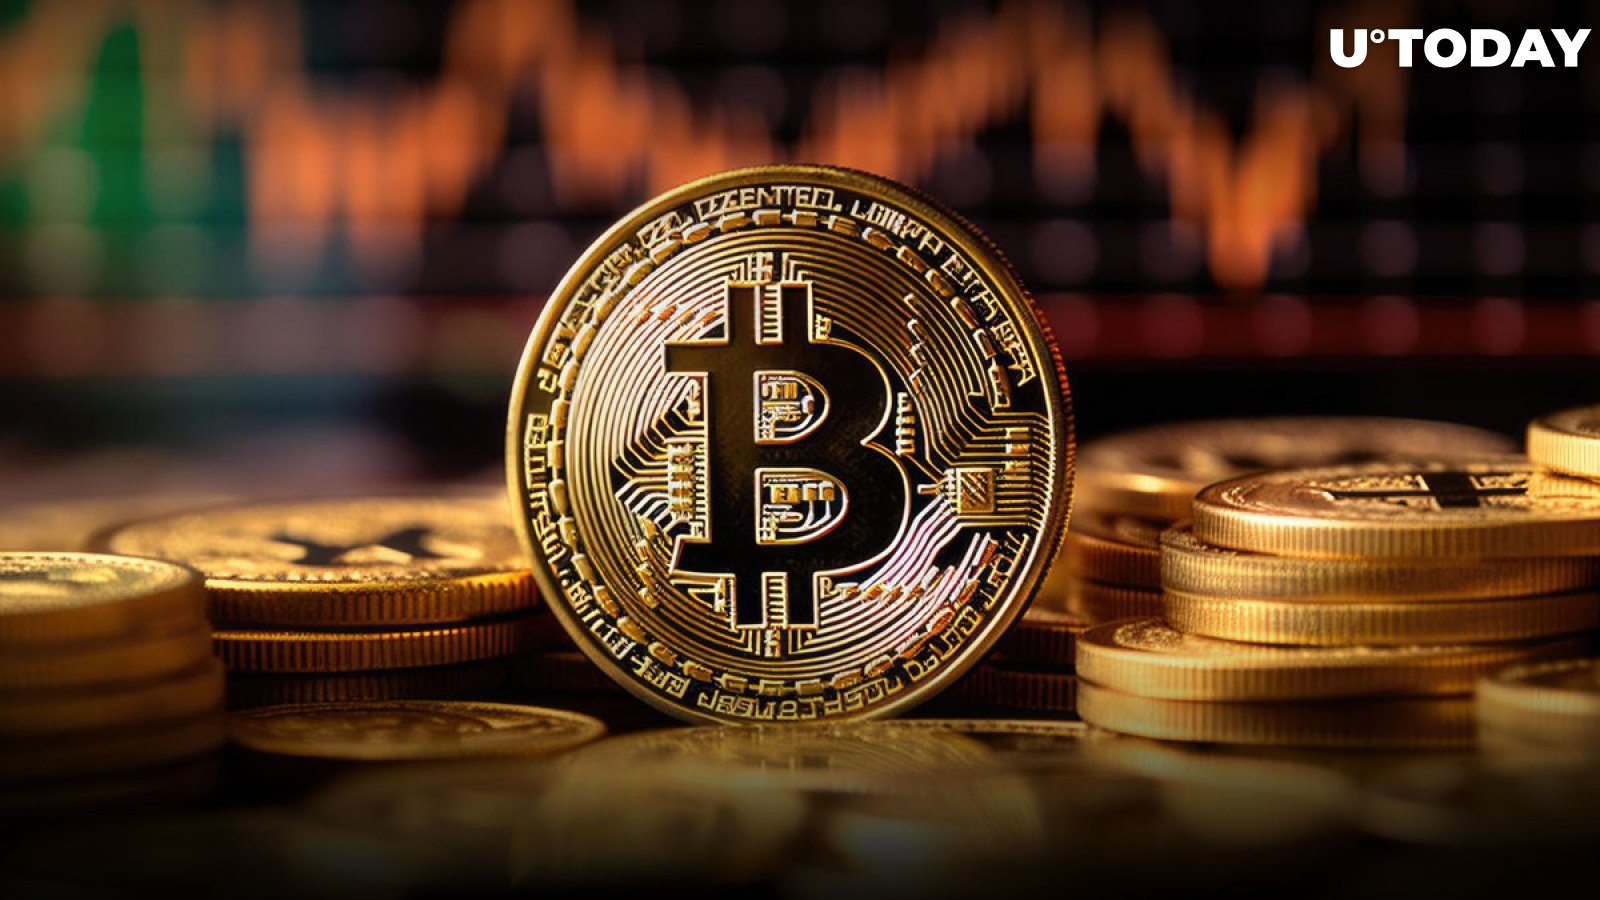 Key Reason Why Bitcoin (BTC) Is Struggling Now